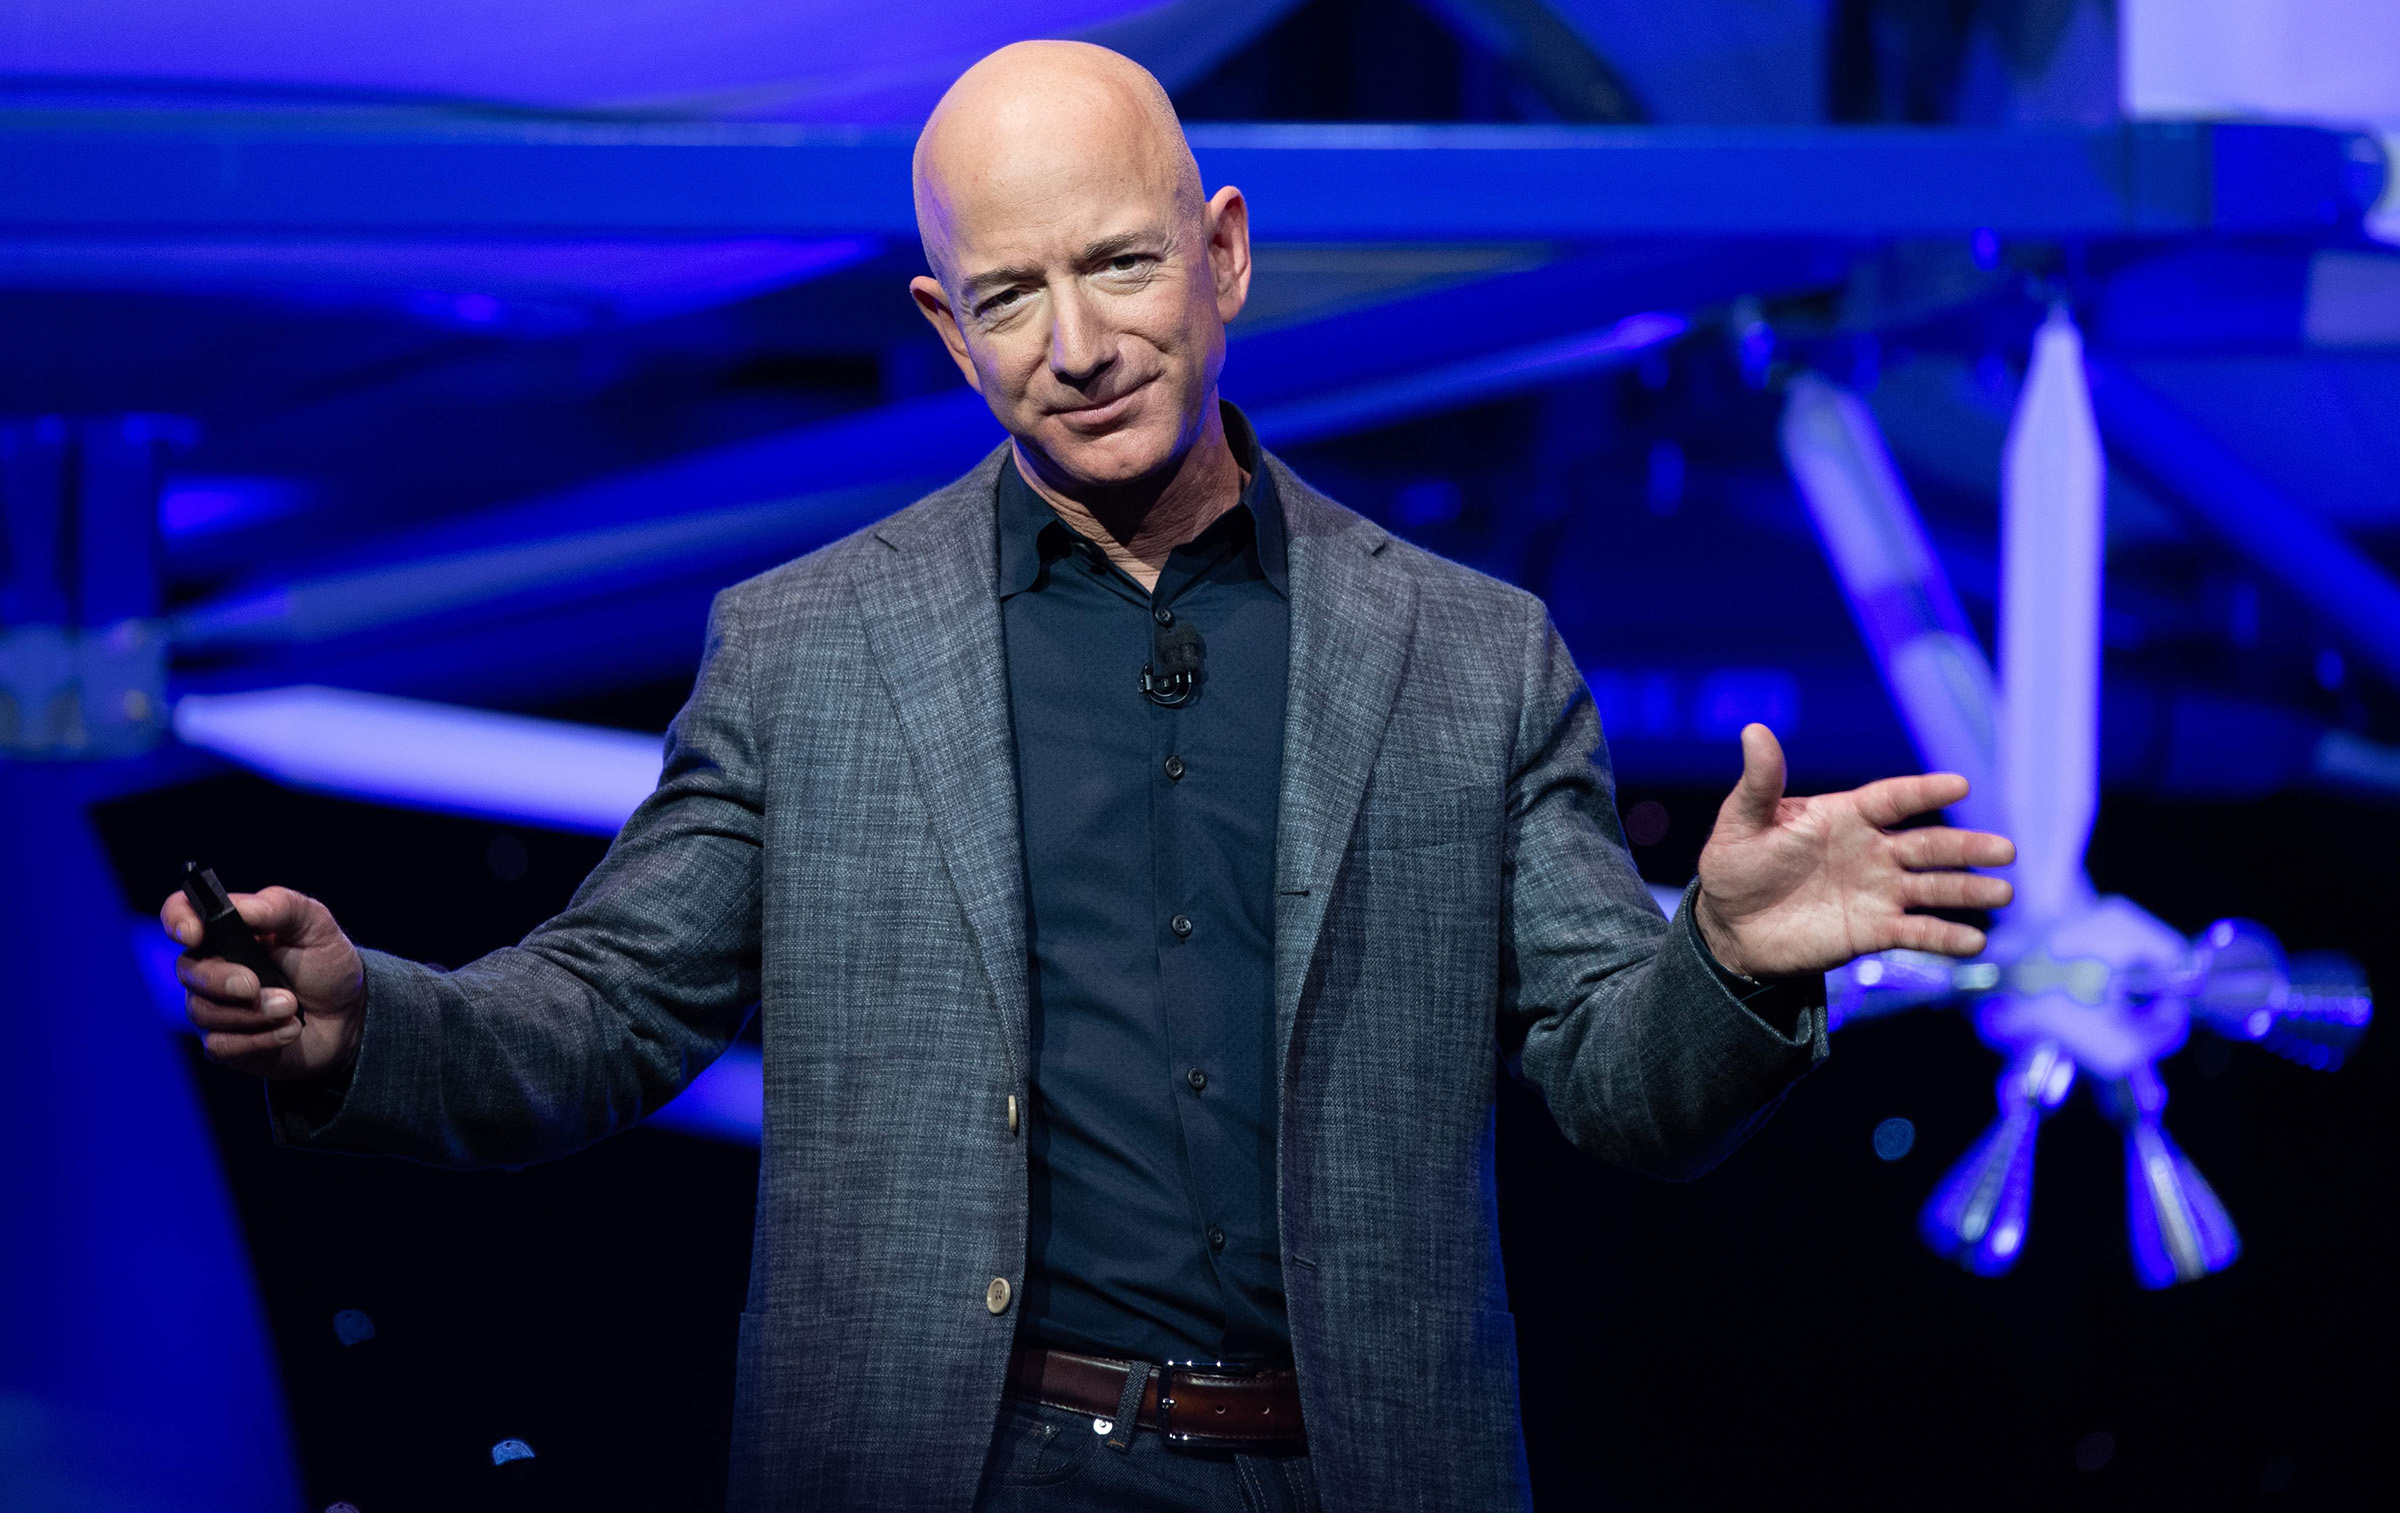 Amazon CEO Jeff Bezos announces Blue Moon, a lunar landing vehicle for the Moon, during an event in Washington, DC, on May 9, 2019. (Saul Loeb—AFP/Getty Images)